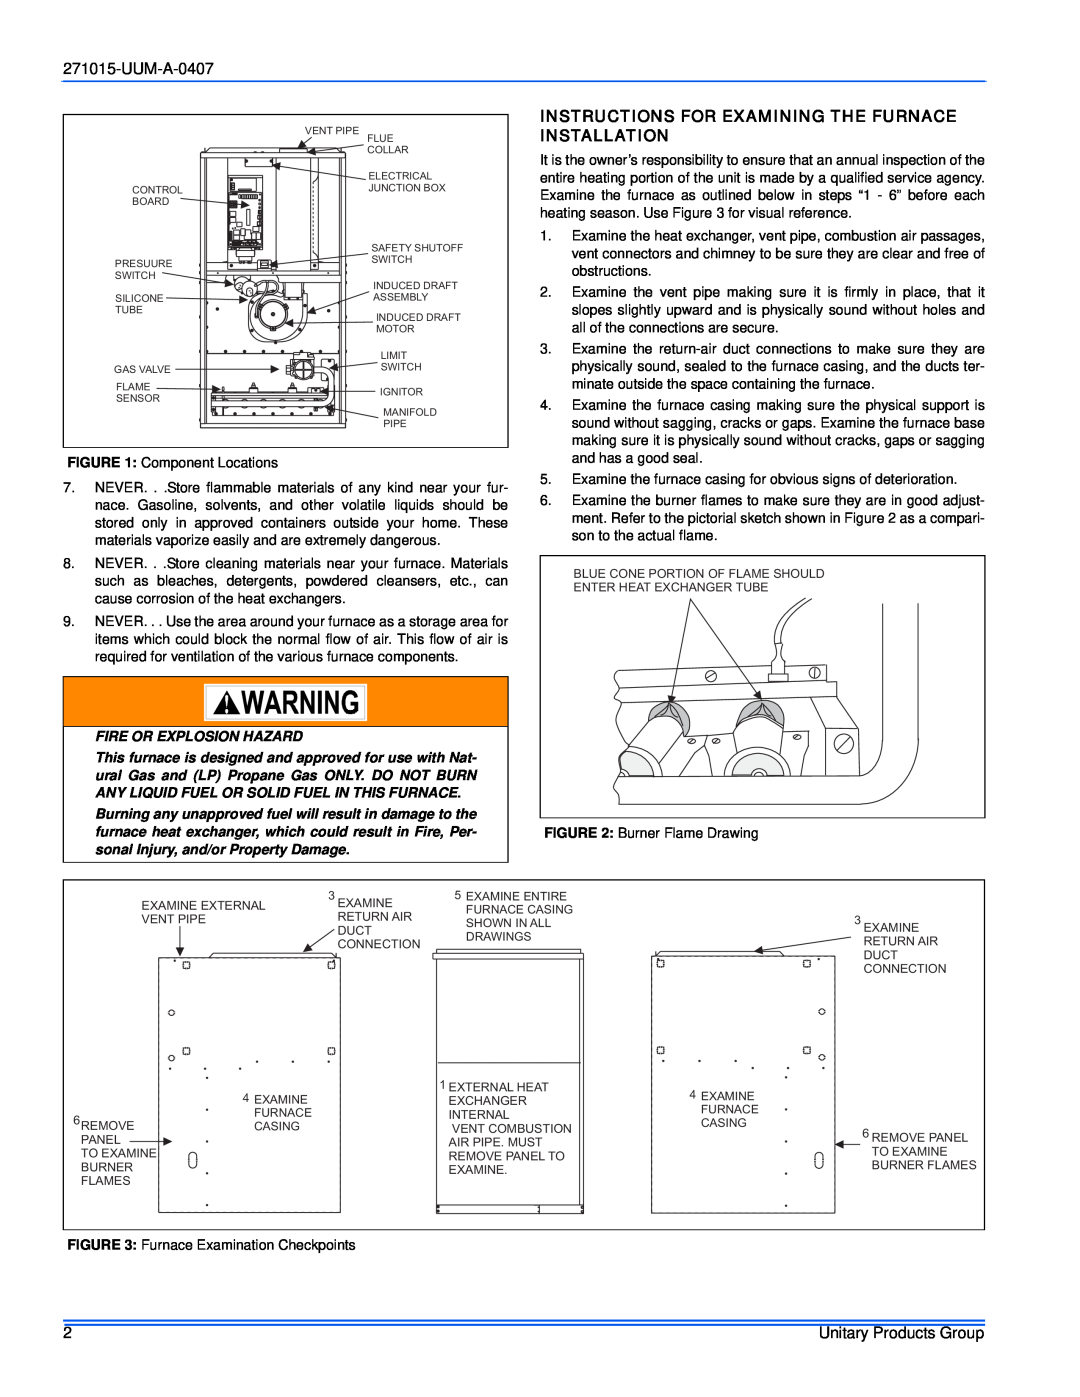 York FL8V*DH, PV8*DH, FC8V*DH, LC8V*DH, LL8V*DH service manual UUM-A-0407, Fire Or Explosion Hazard 